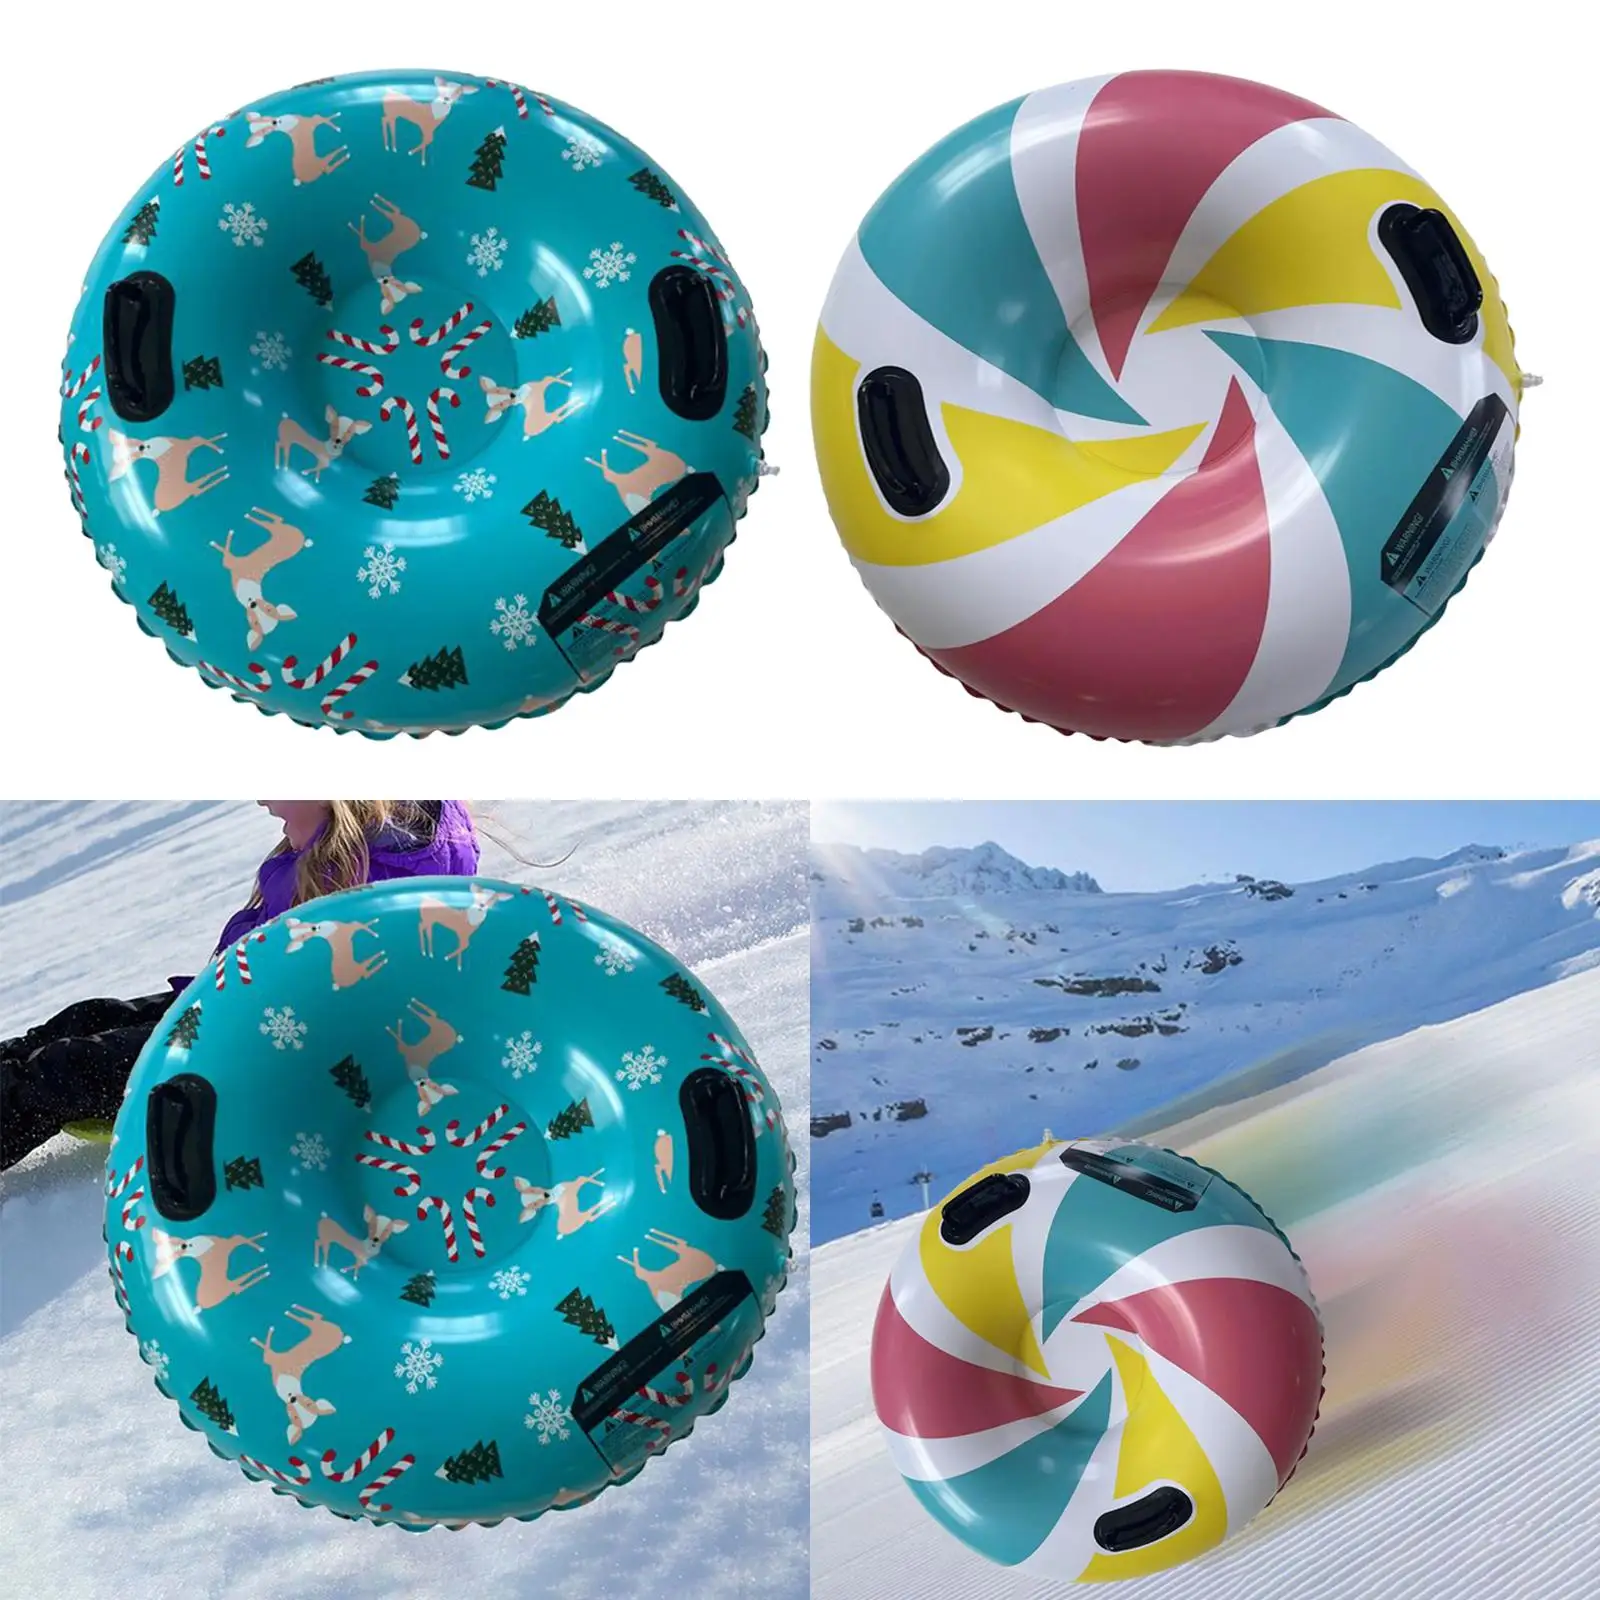 Heavy Duty Winter Snow Tube Easy to Carry Diameter 91cm Tube Snow Toy Thick